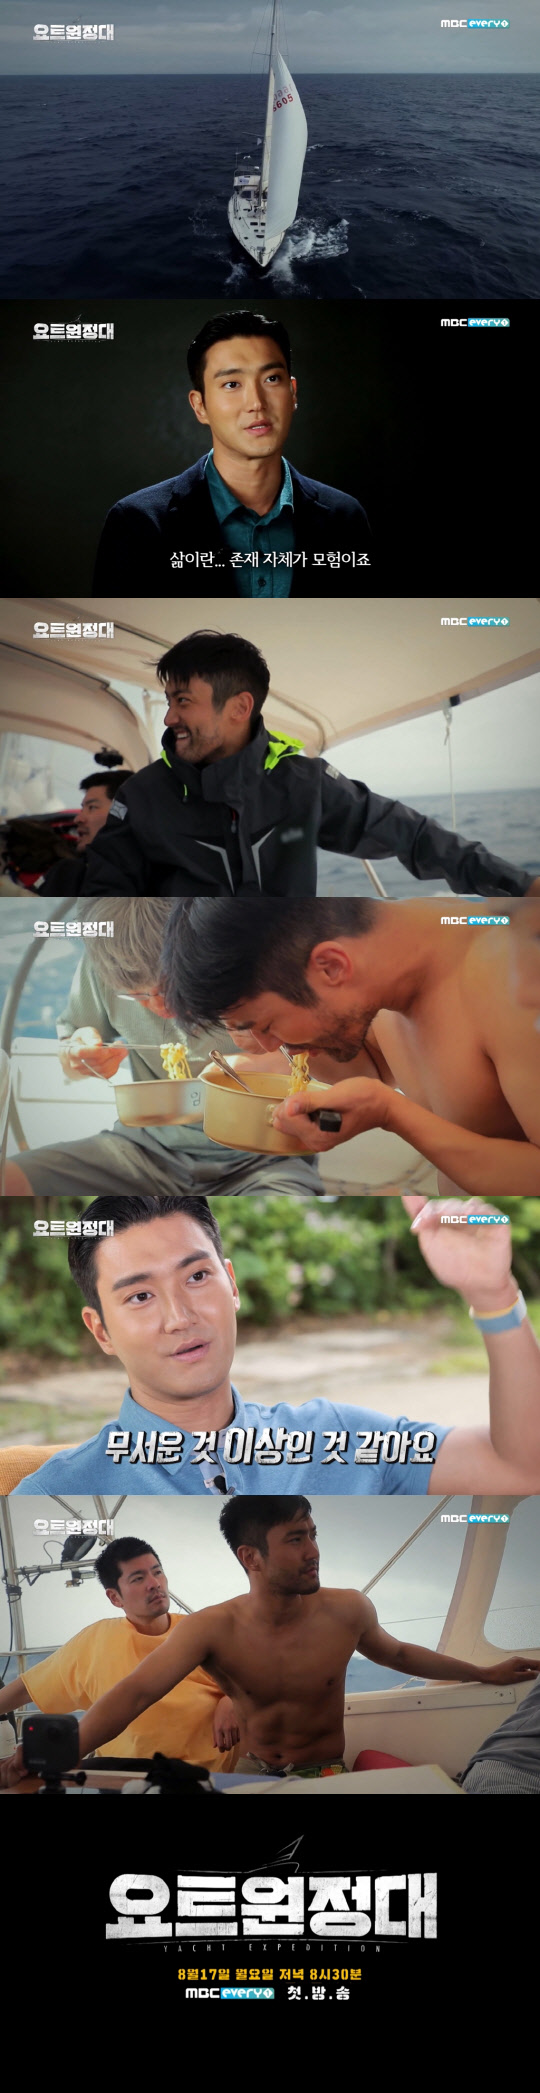 The wild adventure of yacht expedition Choi Siwon beginsMBC Everlon yacht Expedition will be broadcasted at 8:30 pm on the 17th.Yacht Expedition is a documentary entertainment program that shows the process of challenging the Pacific Ocean voyage by four men who dreamed of adventure.Captain Kim Seung-jin, Jin Goo, Choi Siwon, Jang Jang Ha and Song Ho-joon, who succeeded in traveling around the world alone with the first weapons port in Korea, leave for Real Ocean.Previously, the yacht expedition side revealed the character notice Jin Goo side and attracted attention.In the character preview, Jin Goo was enthusiastic in the rising waves and the heavy rain, and made him expect a raw Earth 2.In the meantime, the second character preview of the yacht expedition was released.The yacht expedition Character preview Choi Siwon begins with a voice of We will not be easy to sail by Choi Siwon, who is above one yacht, who is shaken by the ruins.Then, Choi Siwon, who is sailing on the actual yacht, is revealed without hesitation.Choi Siwon has been motion sick on a shaking yacht, or slapped with water because of unstoppable waves; the ensuing scenes are also the shock itself.Choi Siwon, who grew up with a beard, took off his top and inhaled ramen on the yacht, falling and falling in a shaking wave.If Choi Siwon, a synonym for health, has been shaken to this extent, I am more curious about what the situation has been.